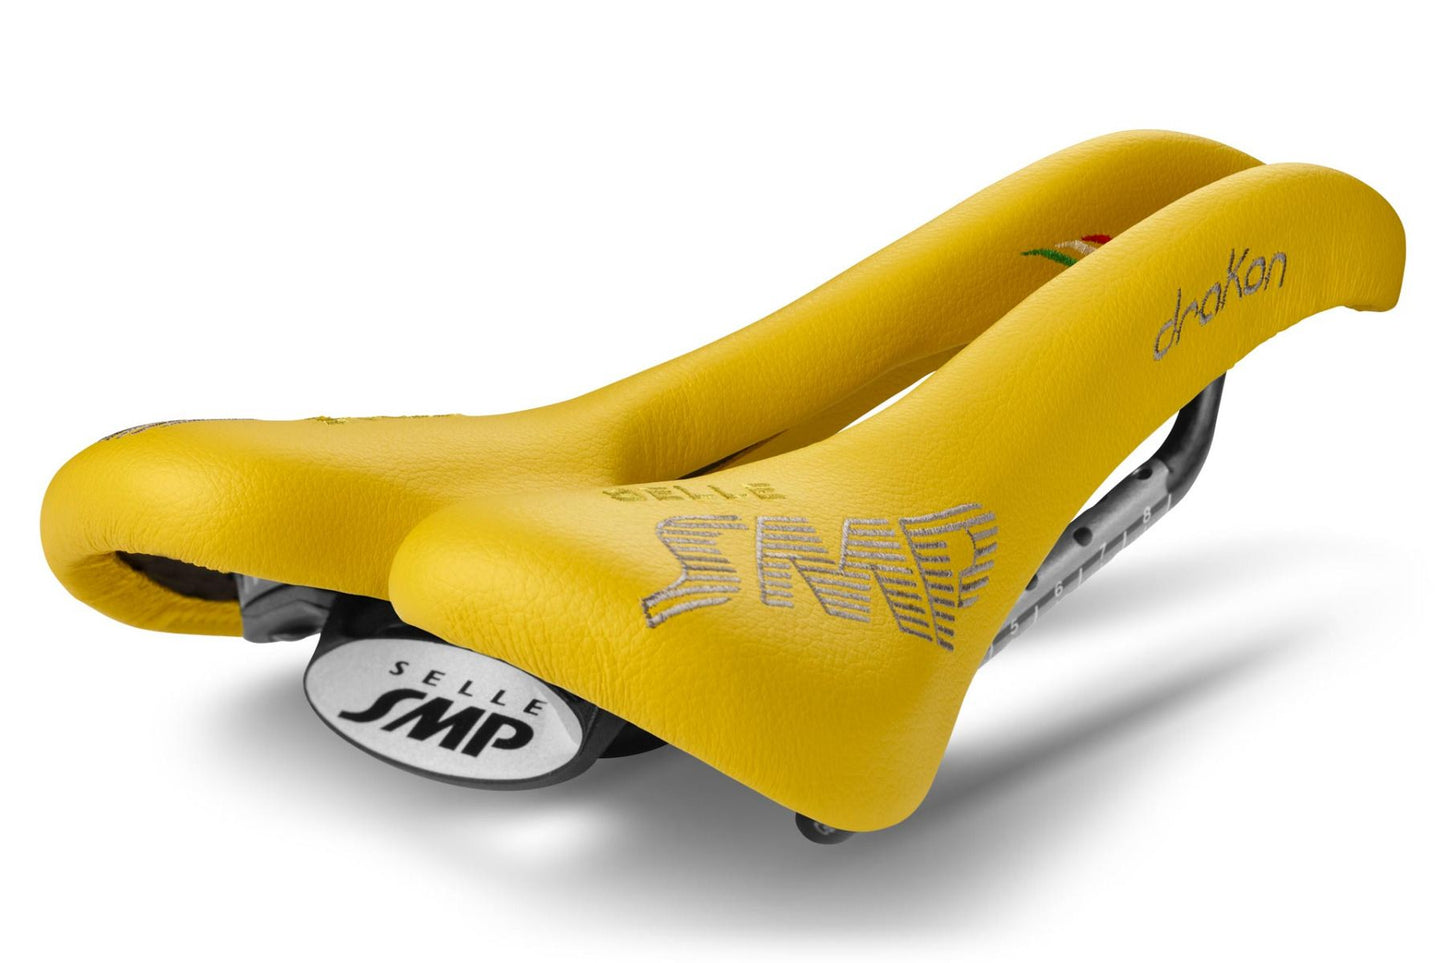 Selle SMP Drakon Saddle with Carbon Rails (Yellow)